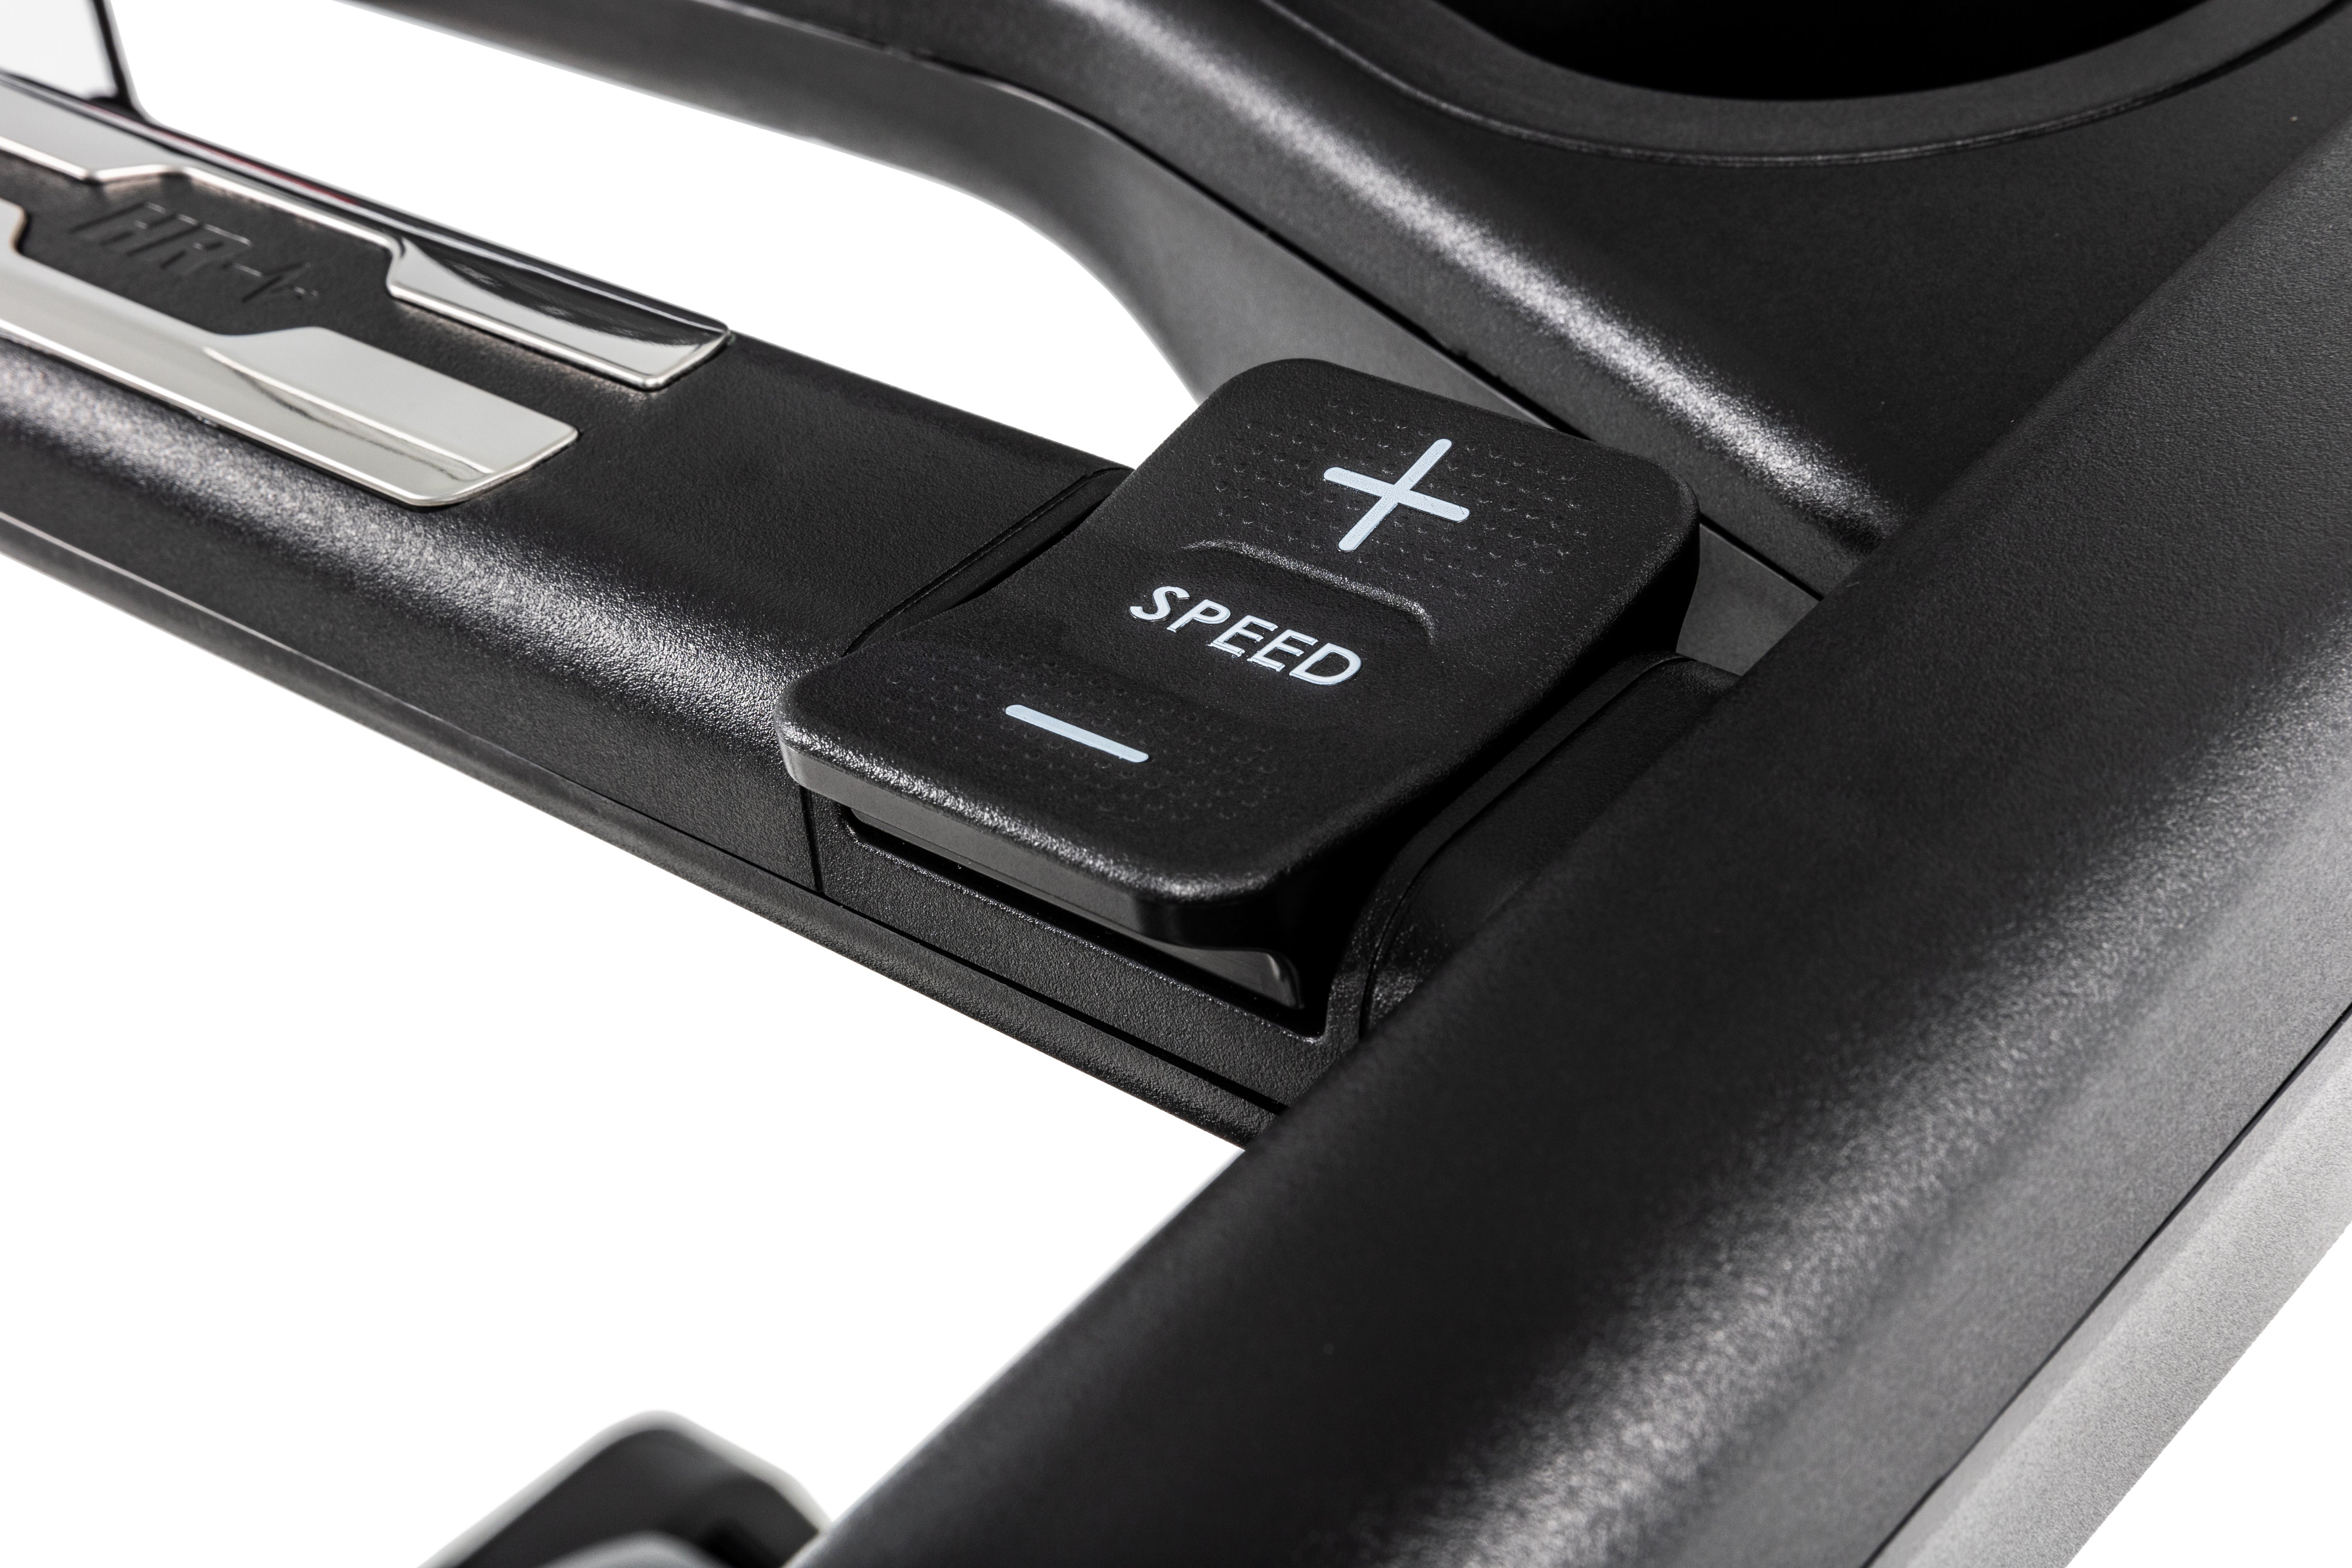 Detailed view of the Sole F80 treadmill's armrest, showcasing the 'SPEED' adjustment buttons with a '+' sign on top and a '-' sign below.